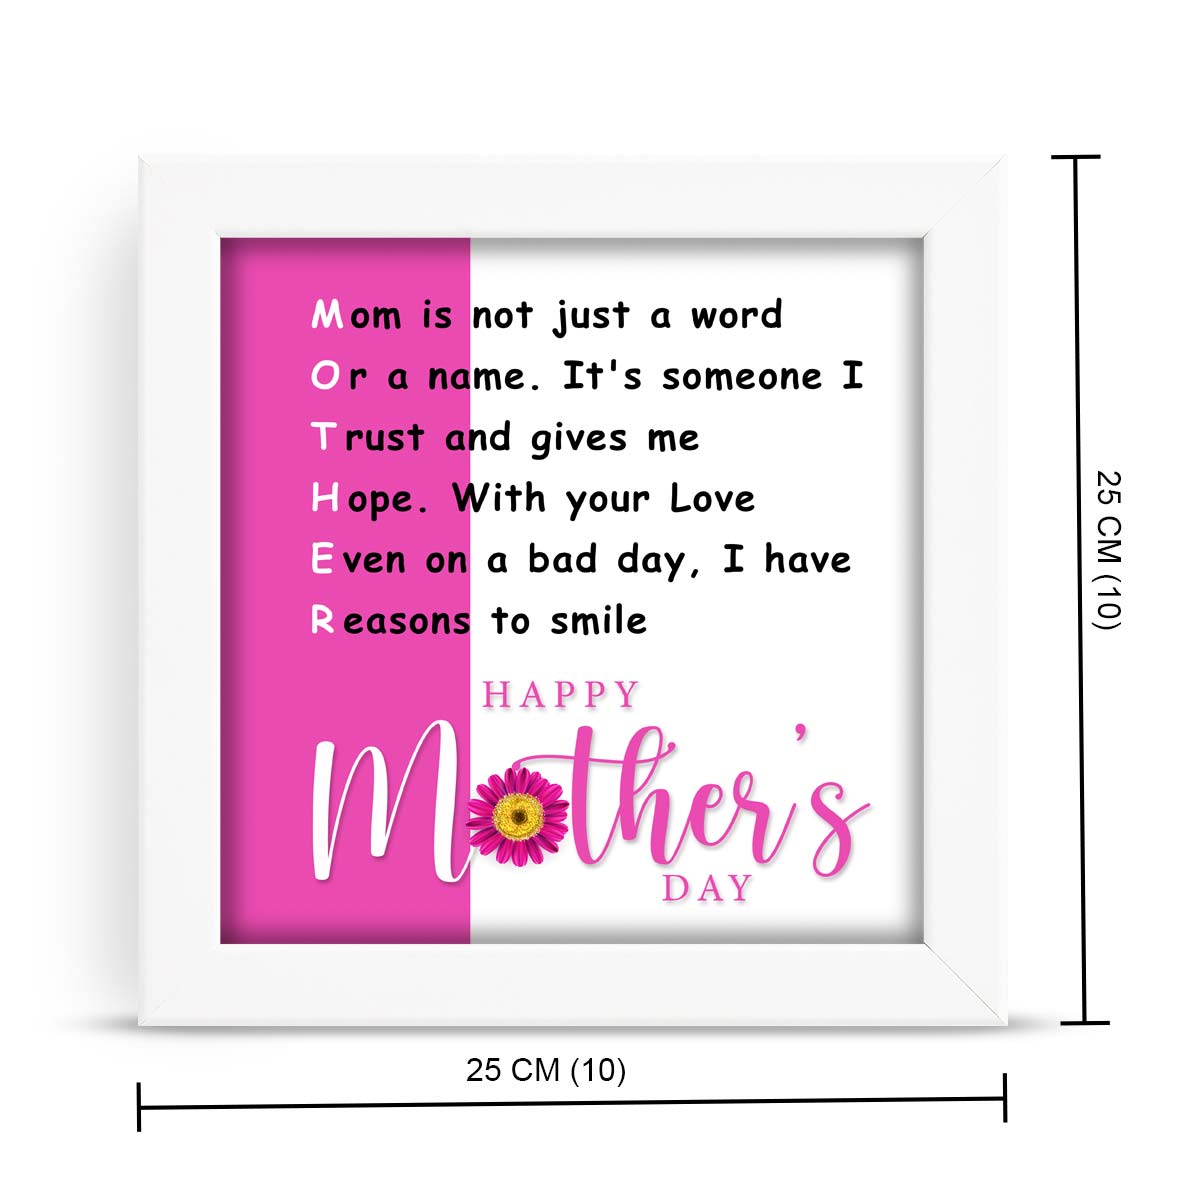 Happy Mothers Day Frame